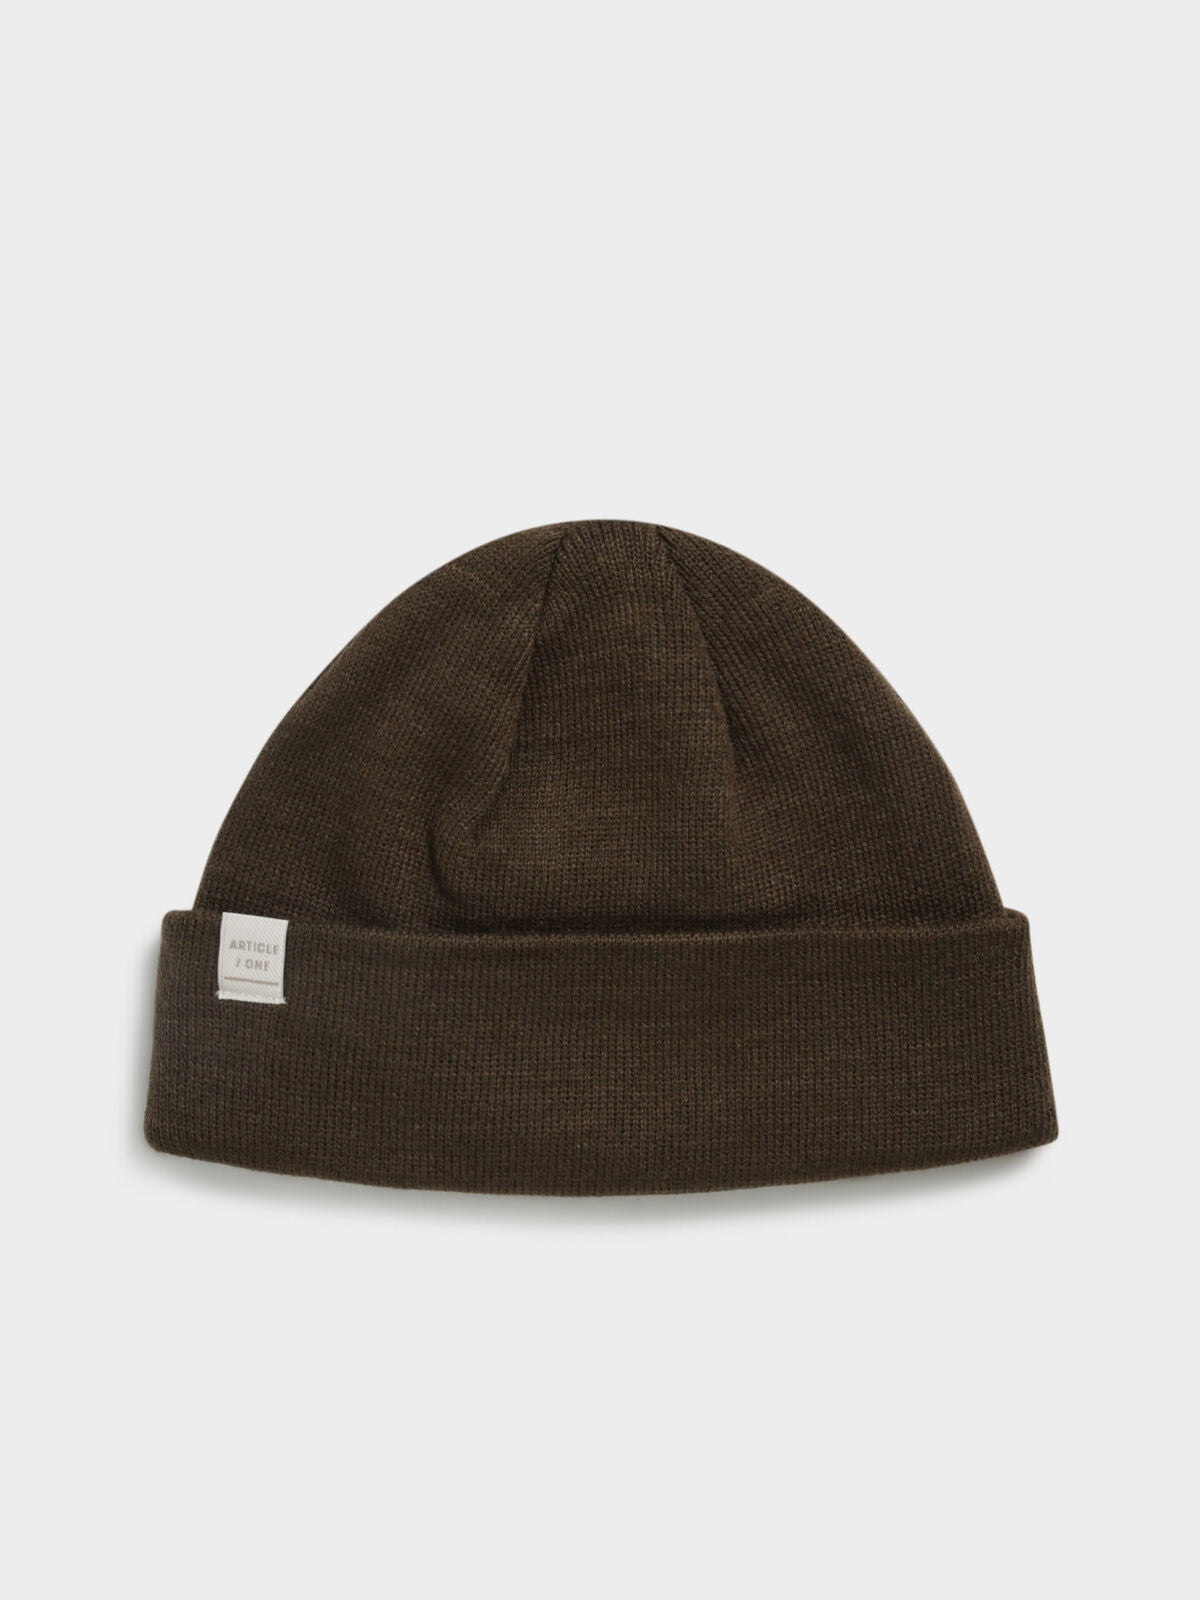 Classic Knit Beanie in Chocolate Brown